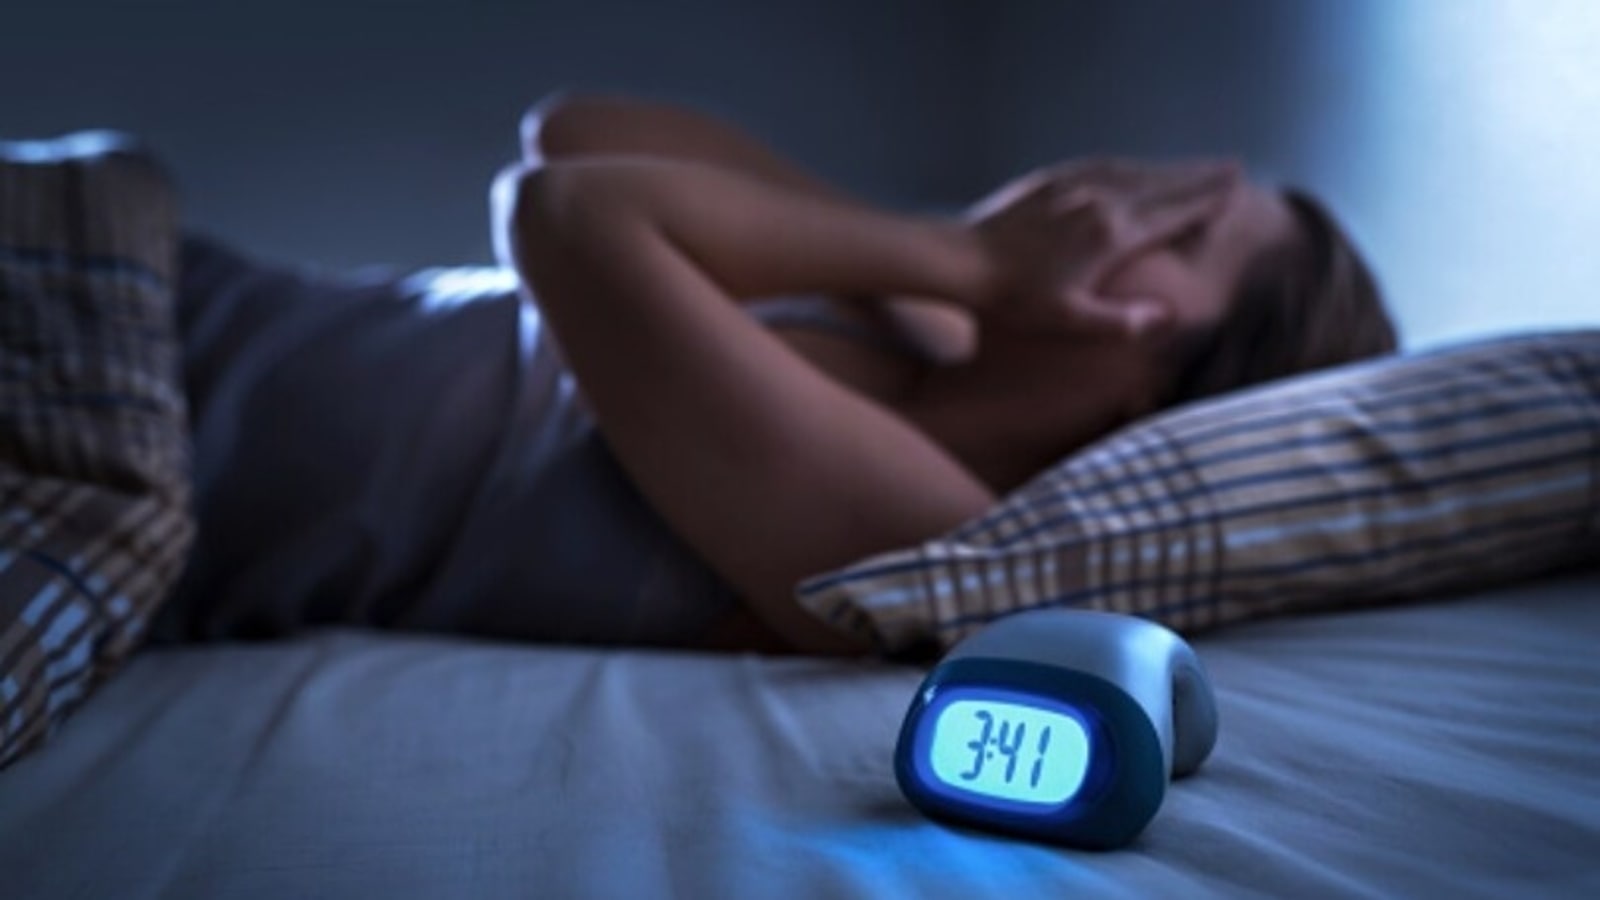 Social media has impact on sleep patterns, finds study